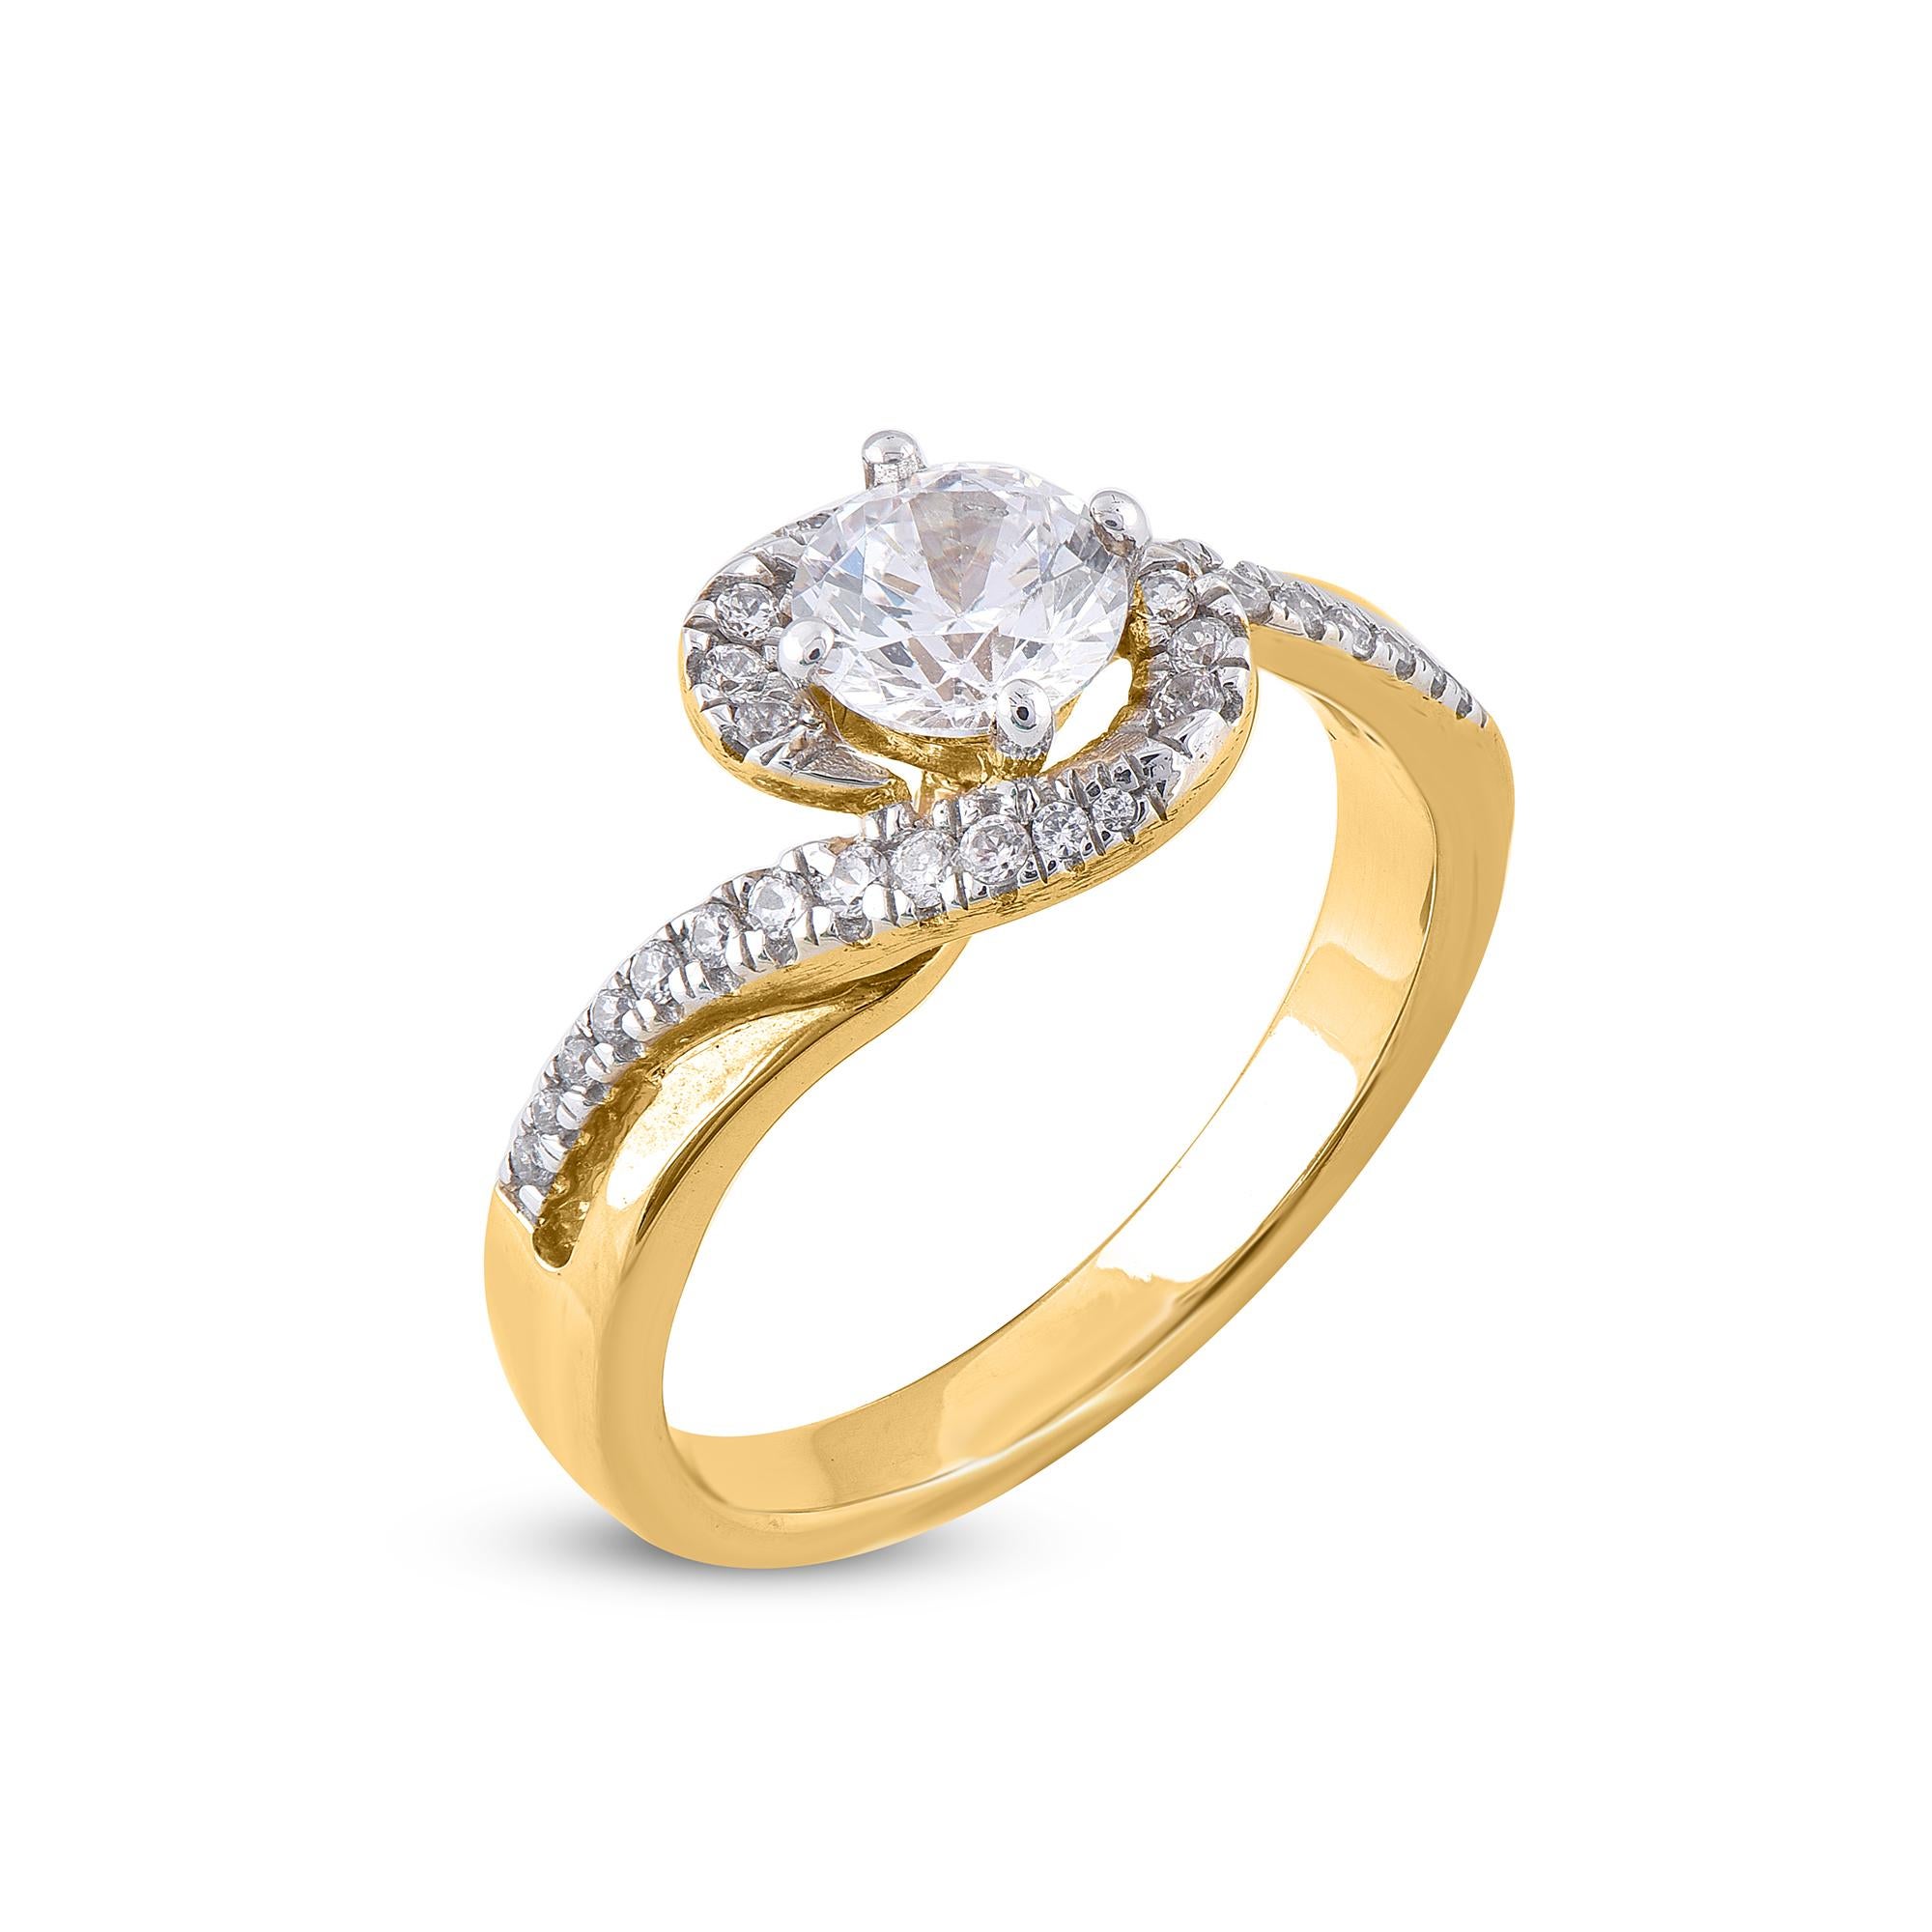 Wow her with the scintillating look of this diamond twisted ring. This engagement ring features 0.80ct of center stone and 0.20ct twisted shank lined diamonds is beautifully designed and studded with 31 round diamond set in prong and micro prong